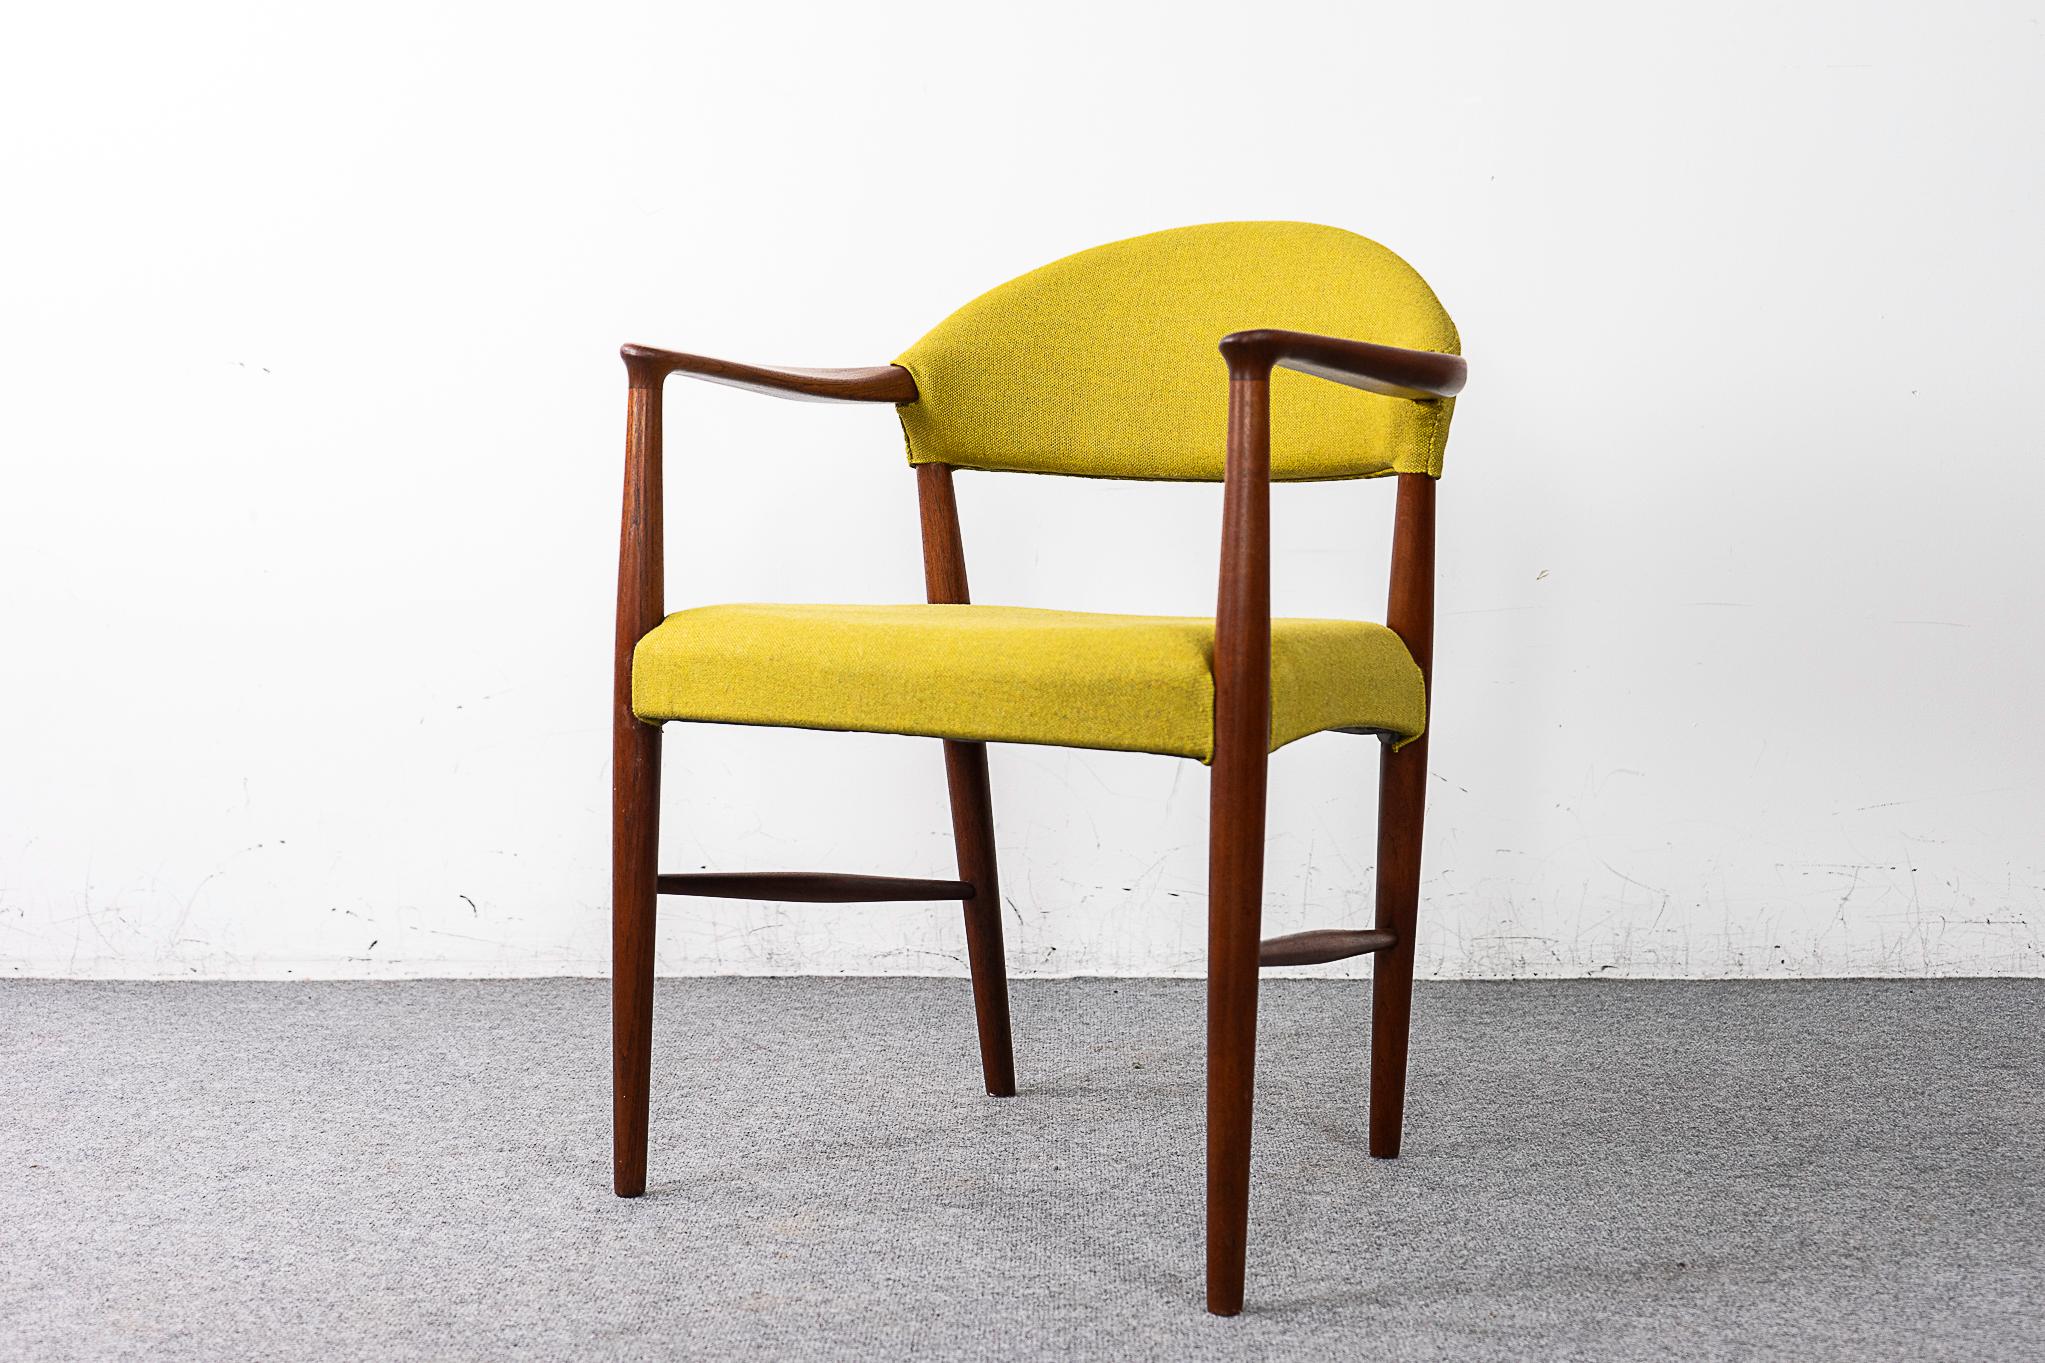 Teak Model 223 Danish arm chair by Kurt Olsen, circa 1960's. Sculptural solid wood frame with elegant details. Splayed tapering legs with spindle cross bars. Lovely lemon/lime upholstery in a blend of 70% pure new wool and 30% flax.